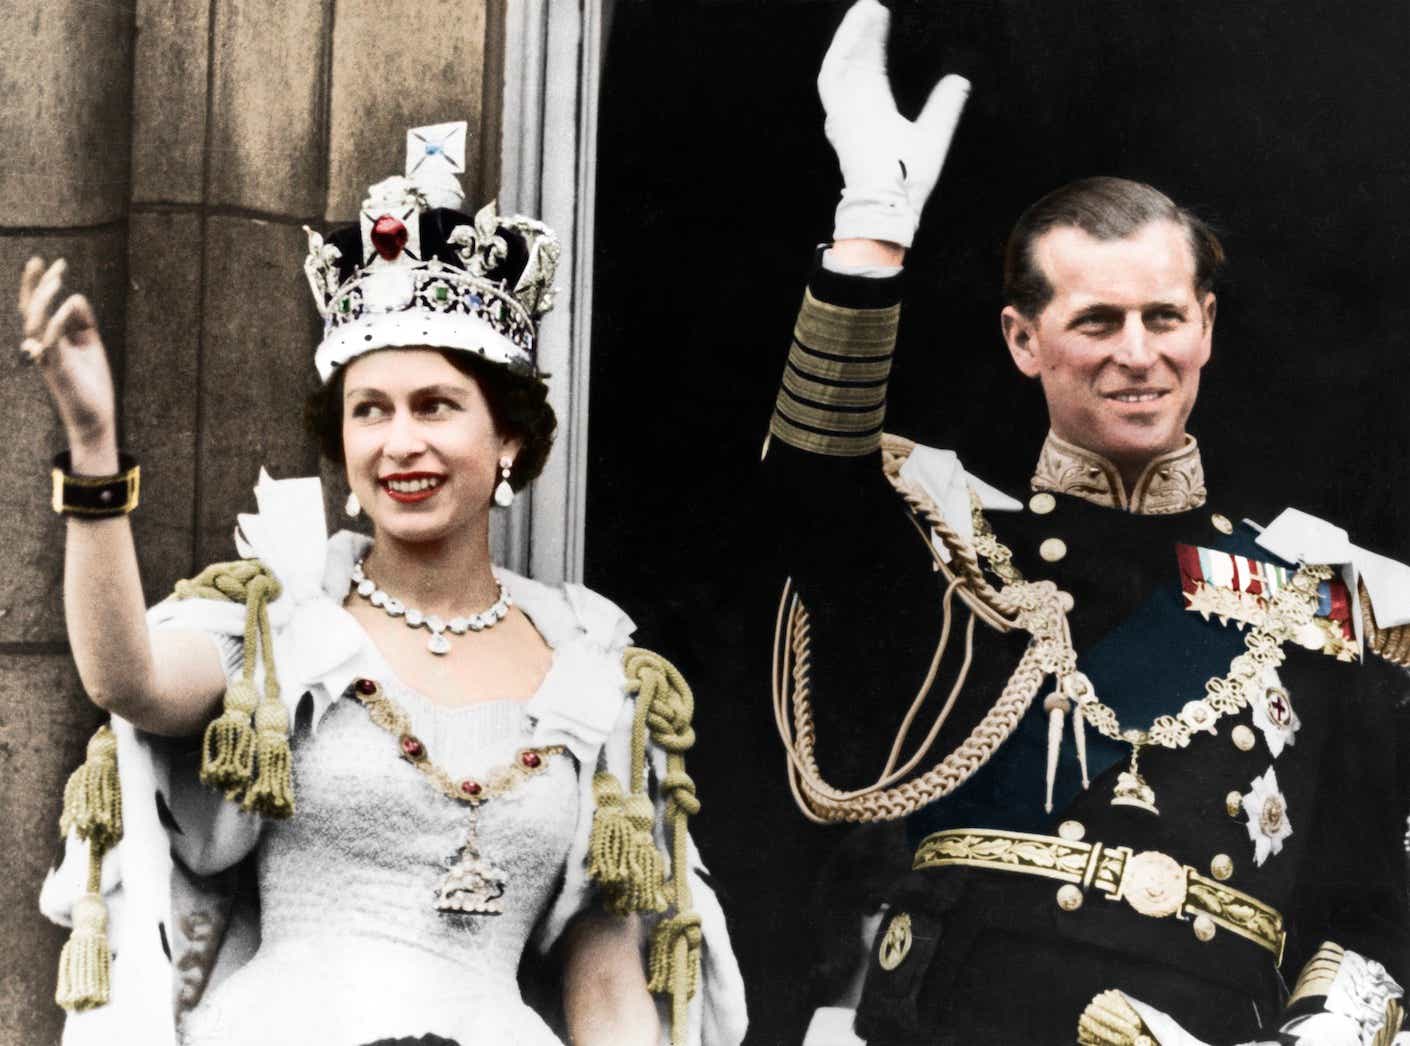 Queen Elizabeth II and the Duke of Edinburgh on the day of their coronation, Buckingham Palace, 1953. She wears an ornate robe and crown while he wears military dress.